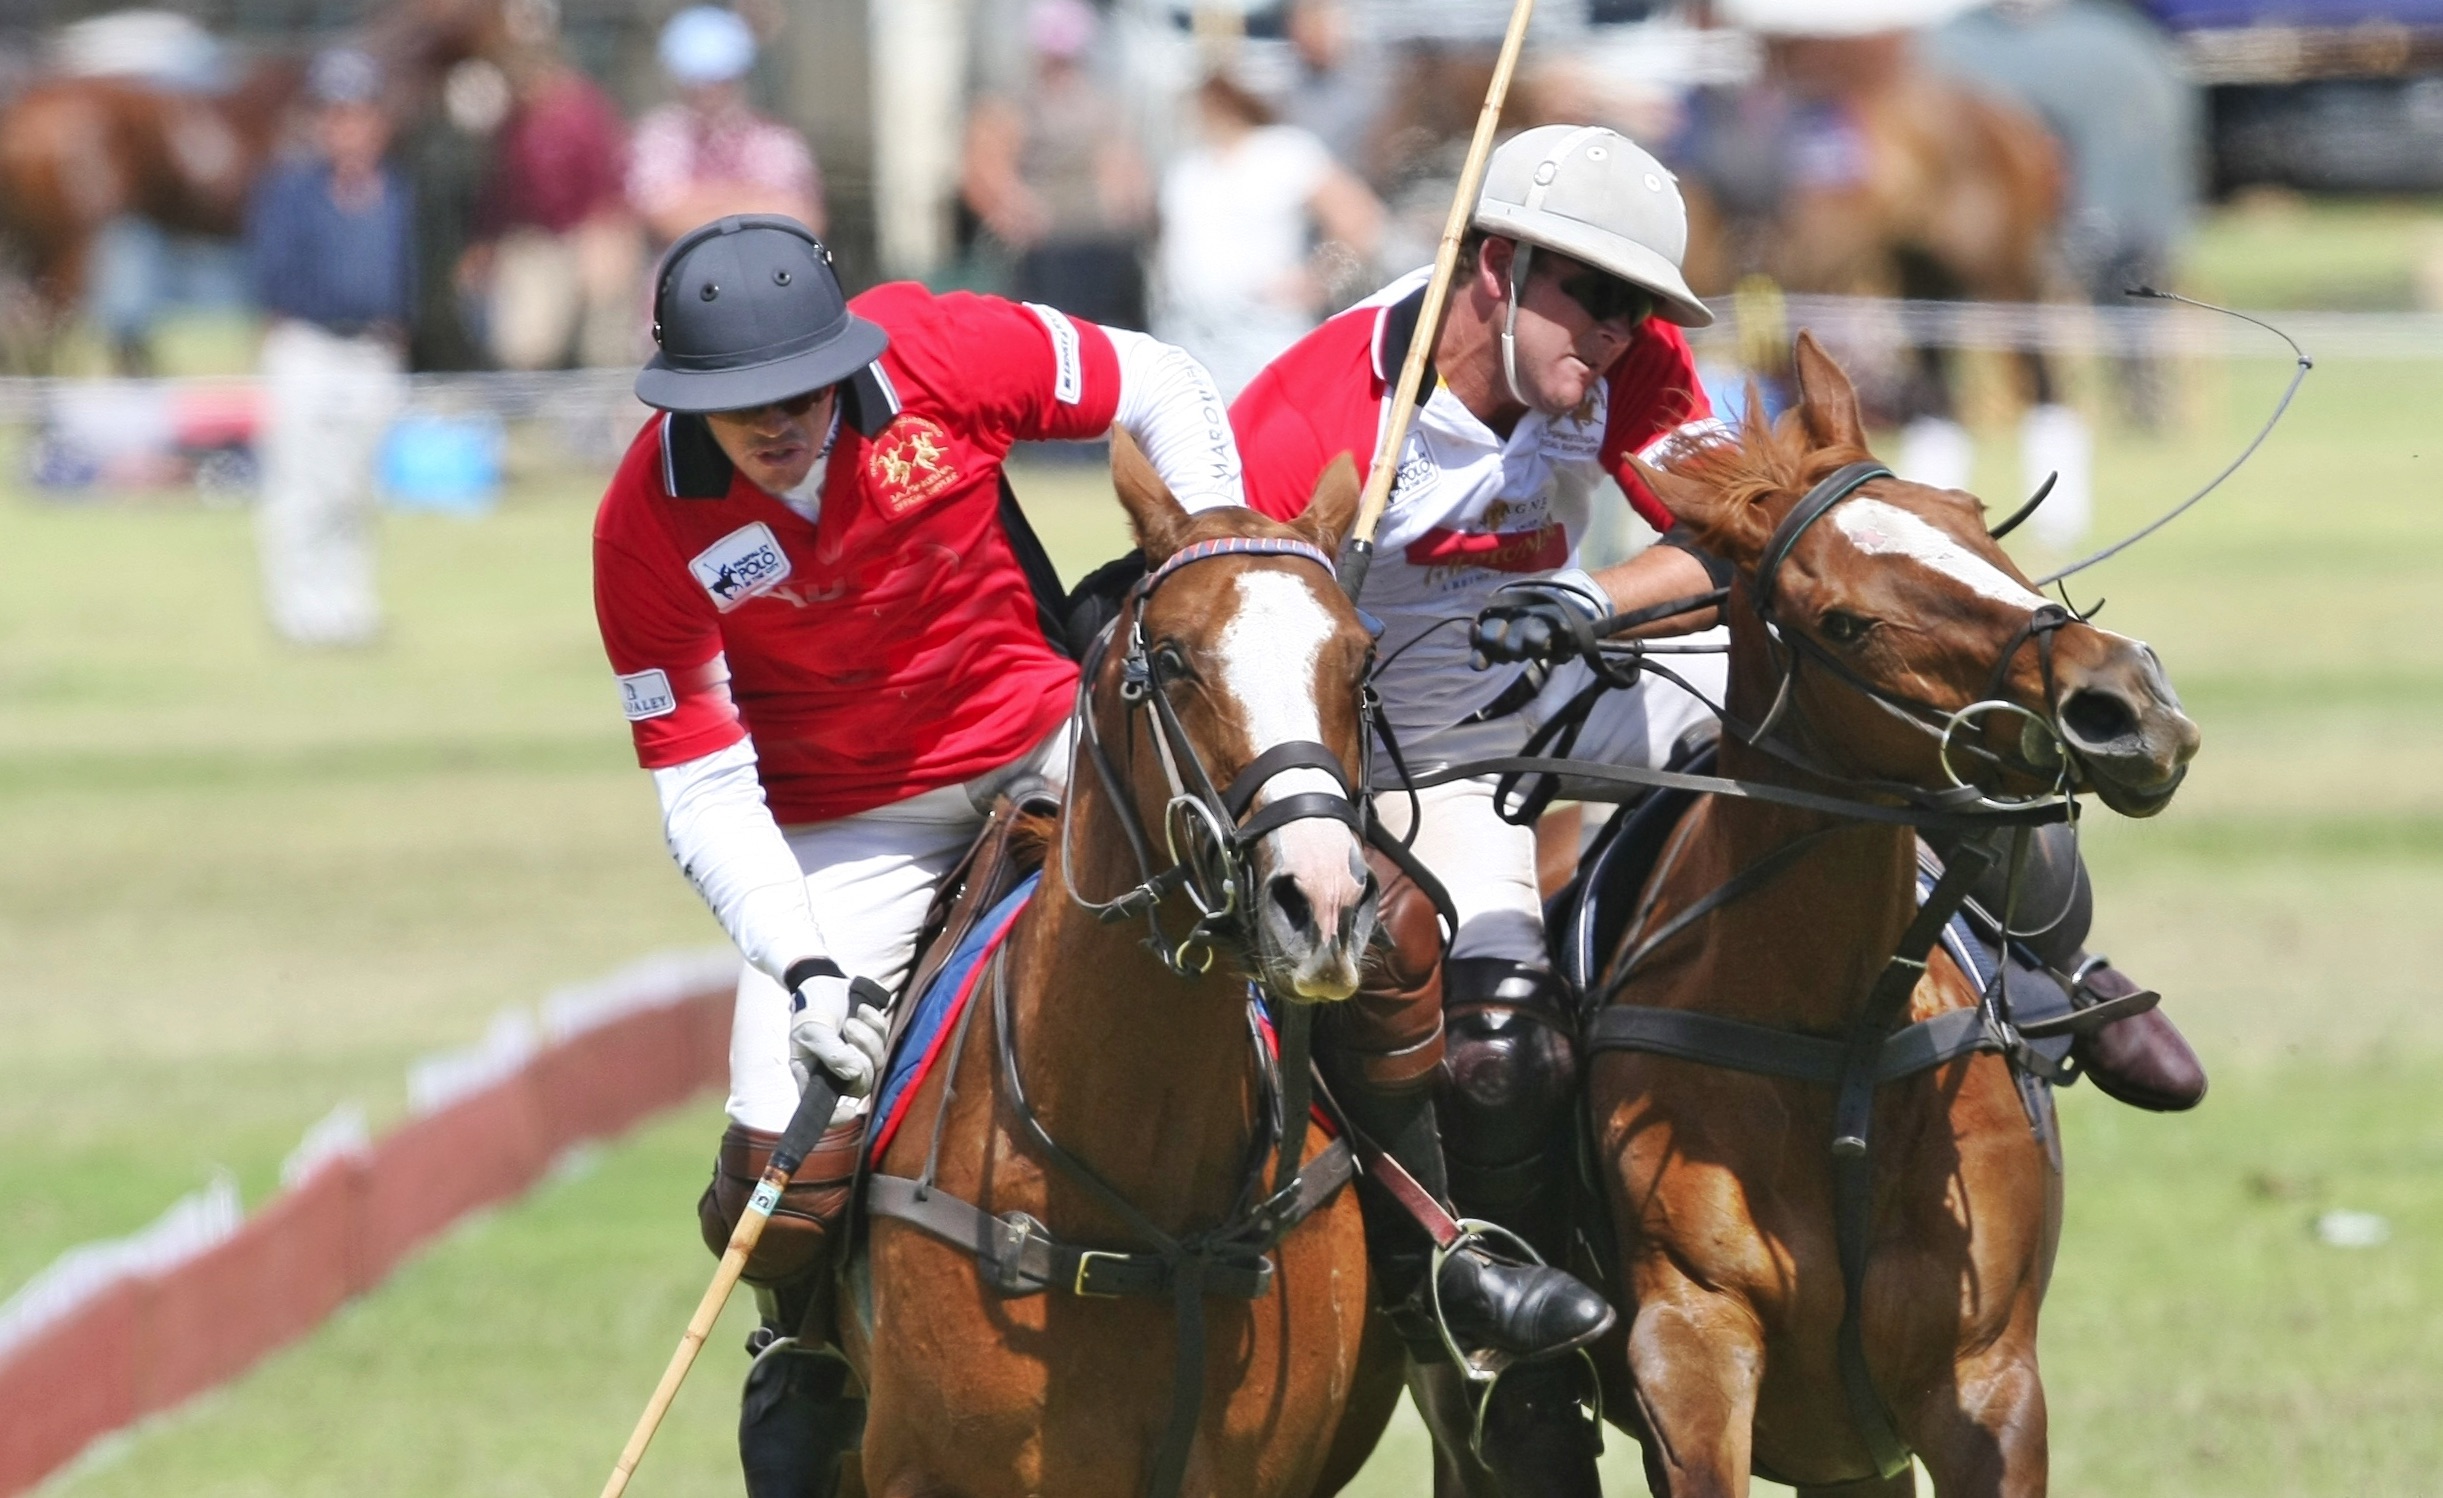 'Polo by the sea' set to attract thousands to Coast